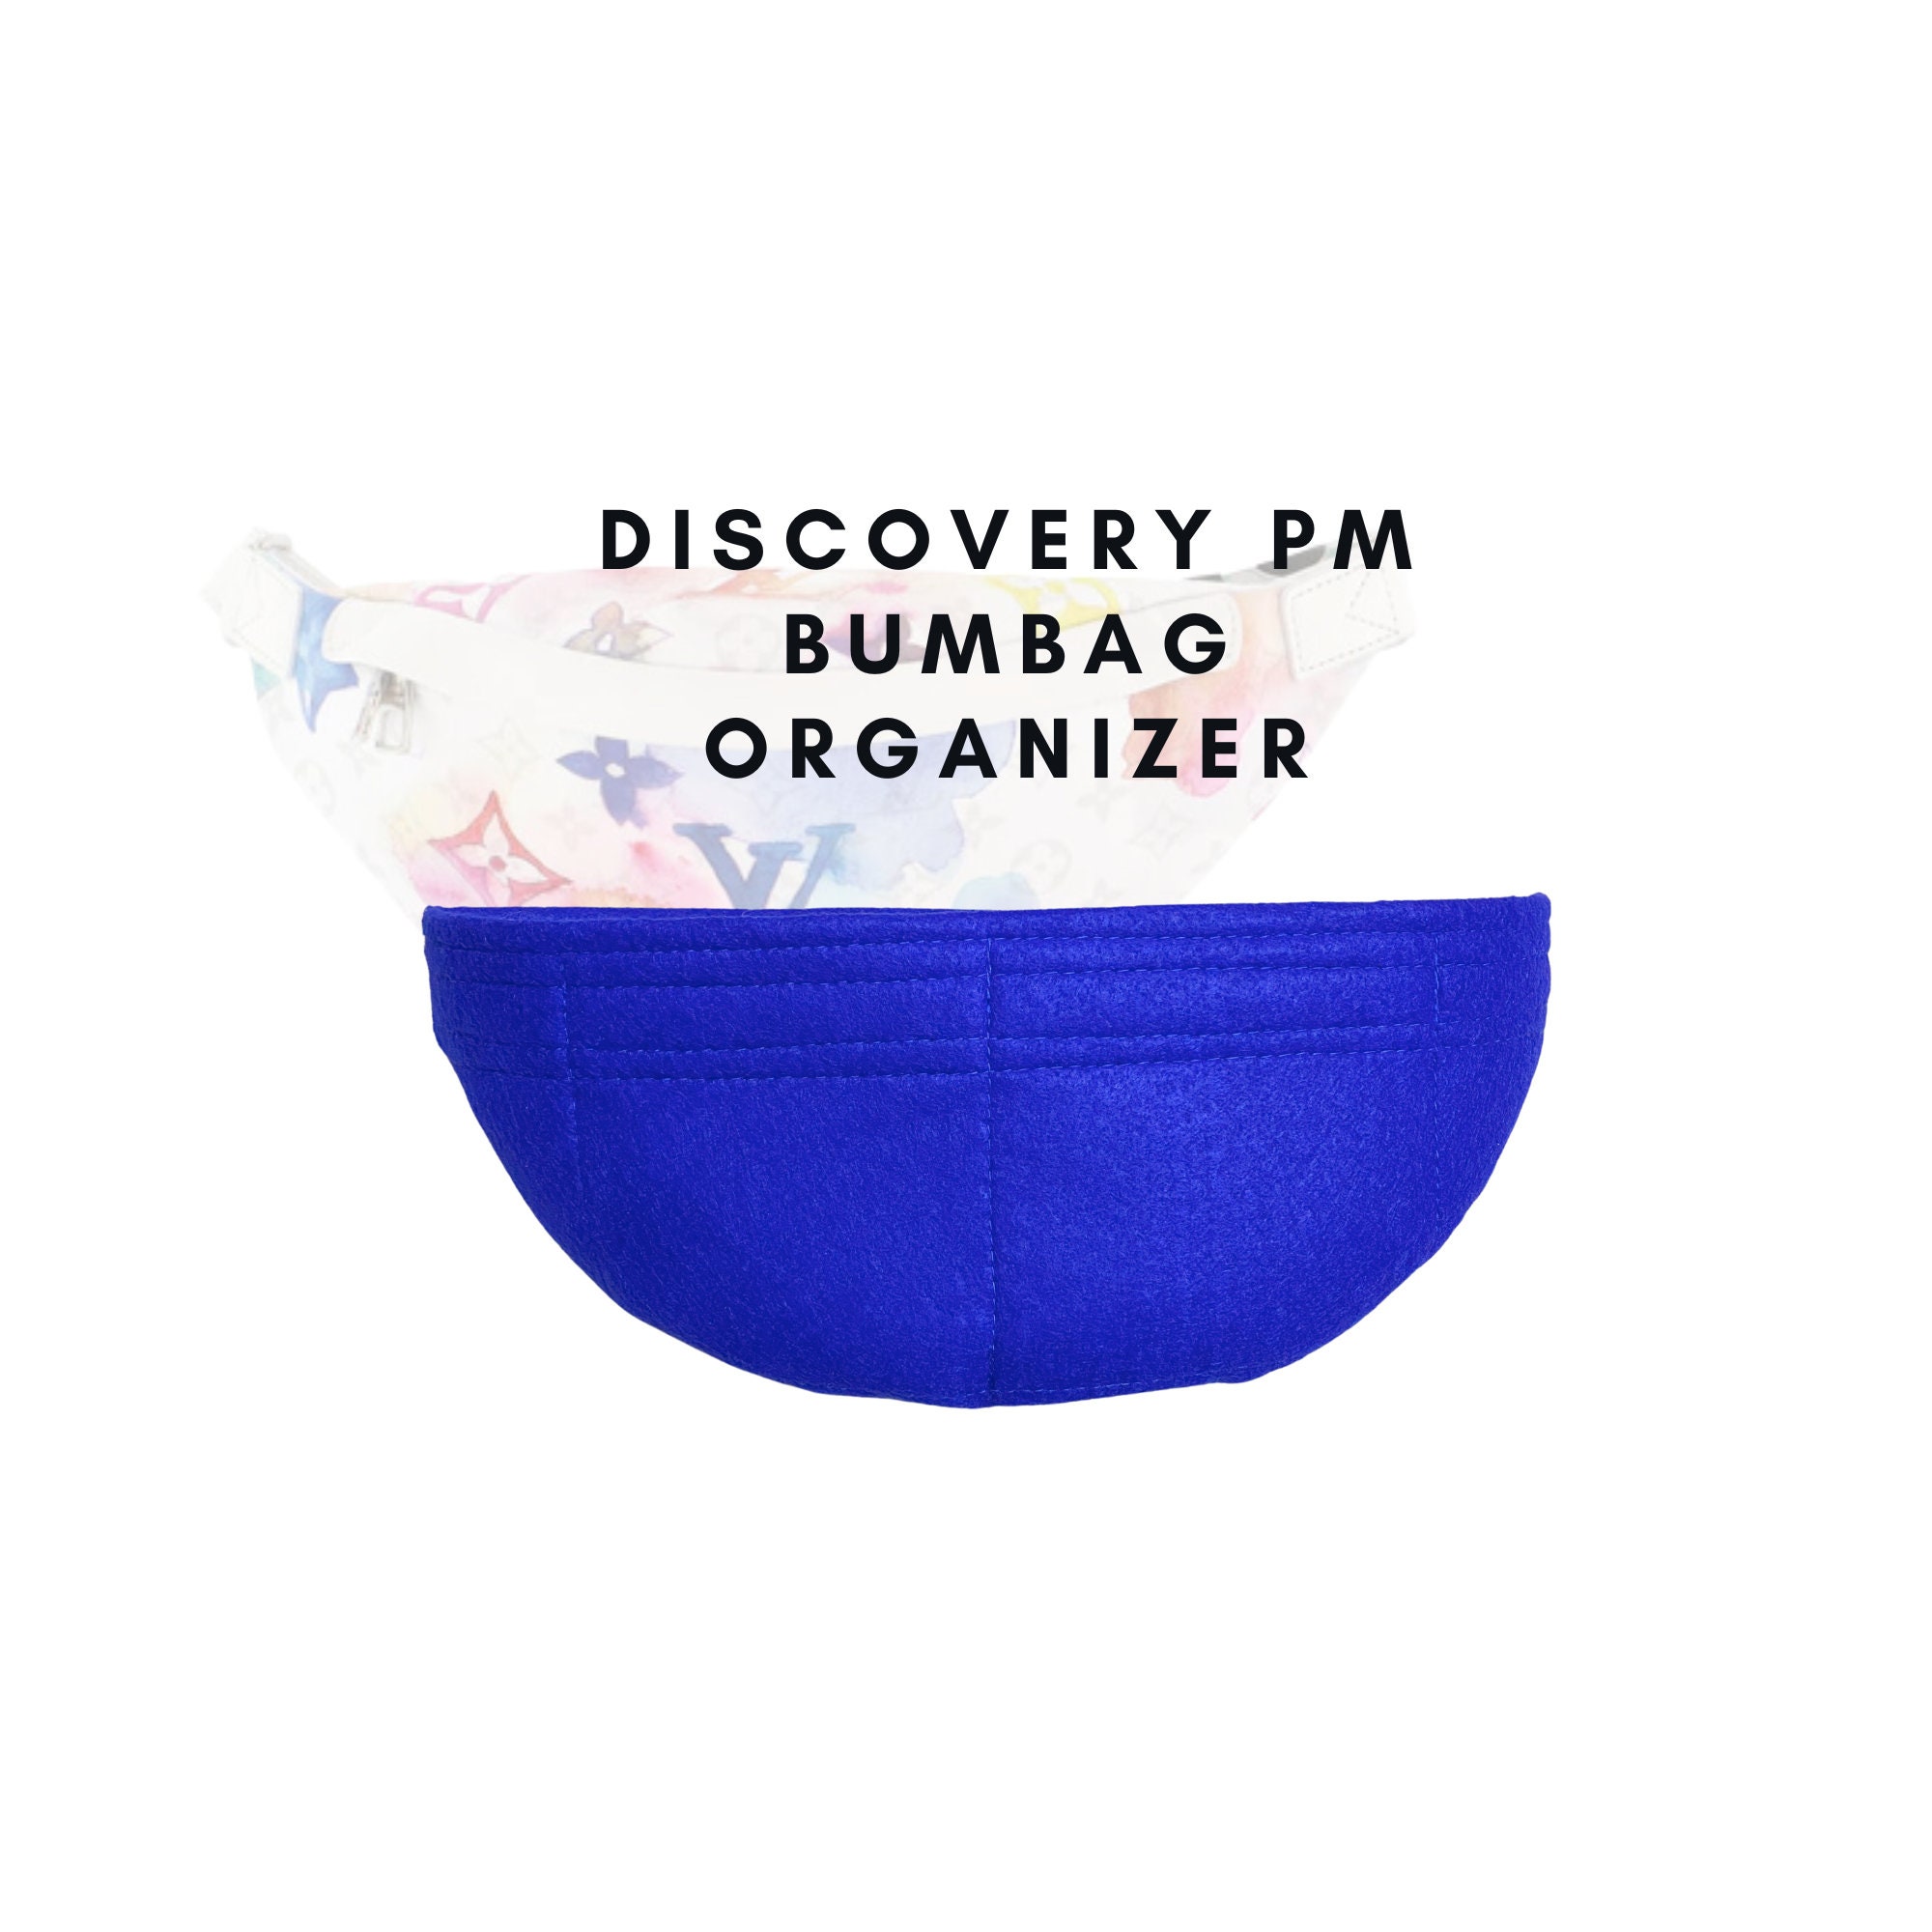 bumbag discovery pm